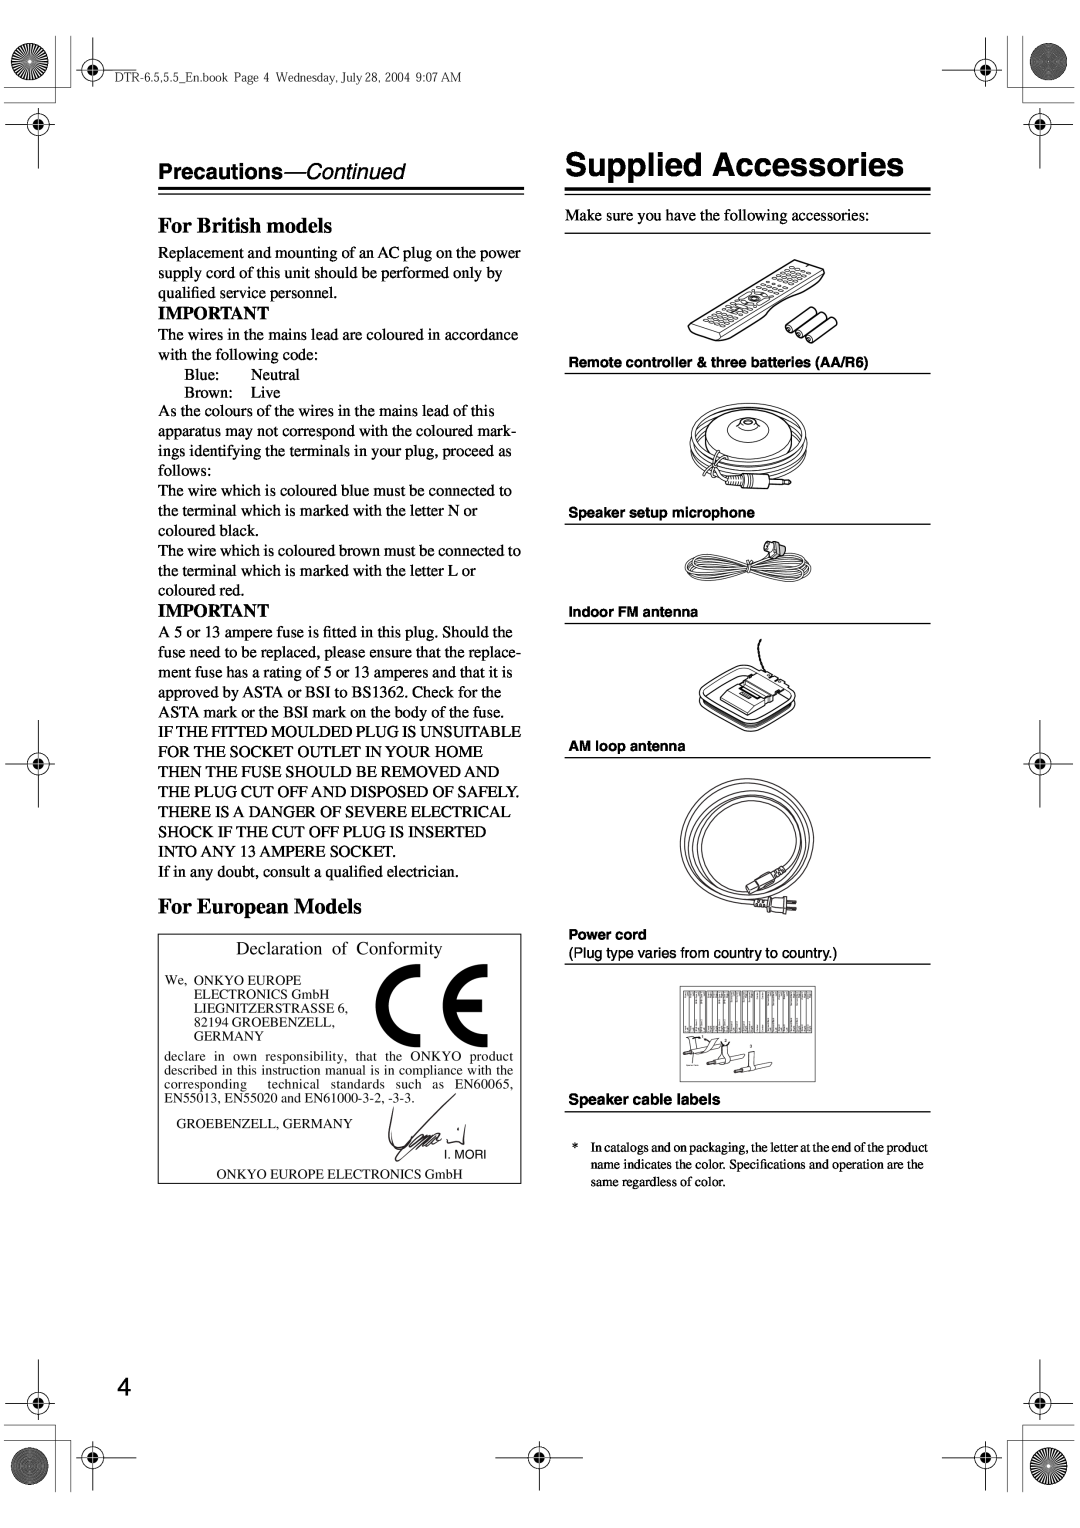 Integra DTR-5.5 instruction manual Supplied Accessories, Precautions—Continued, For British models, For European Models 